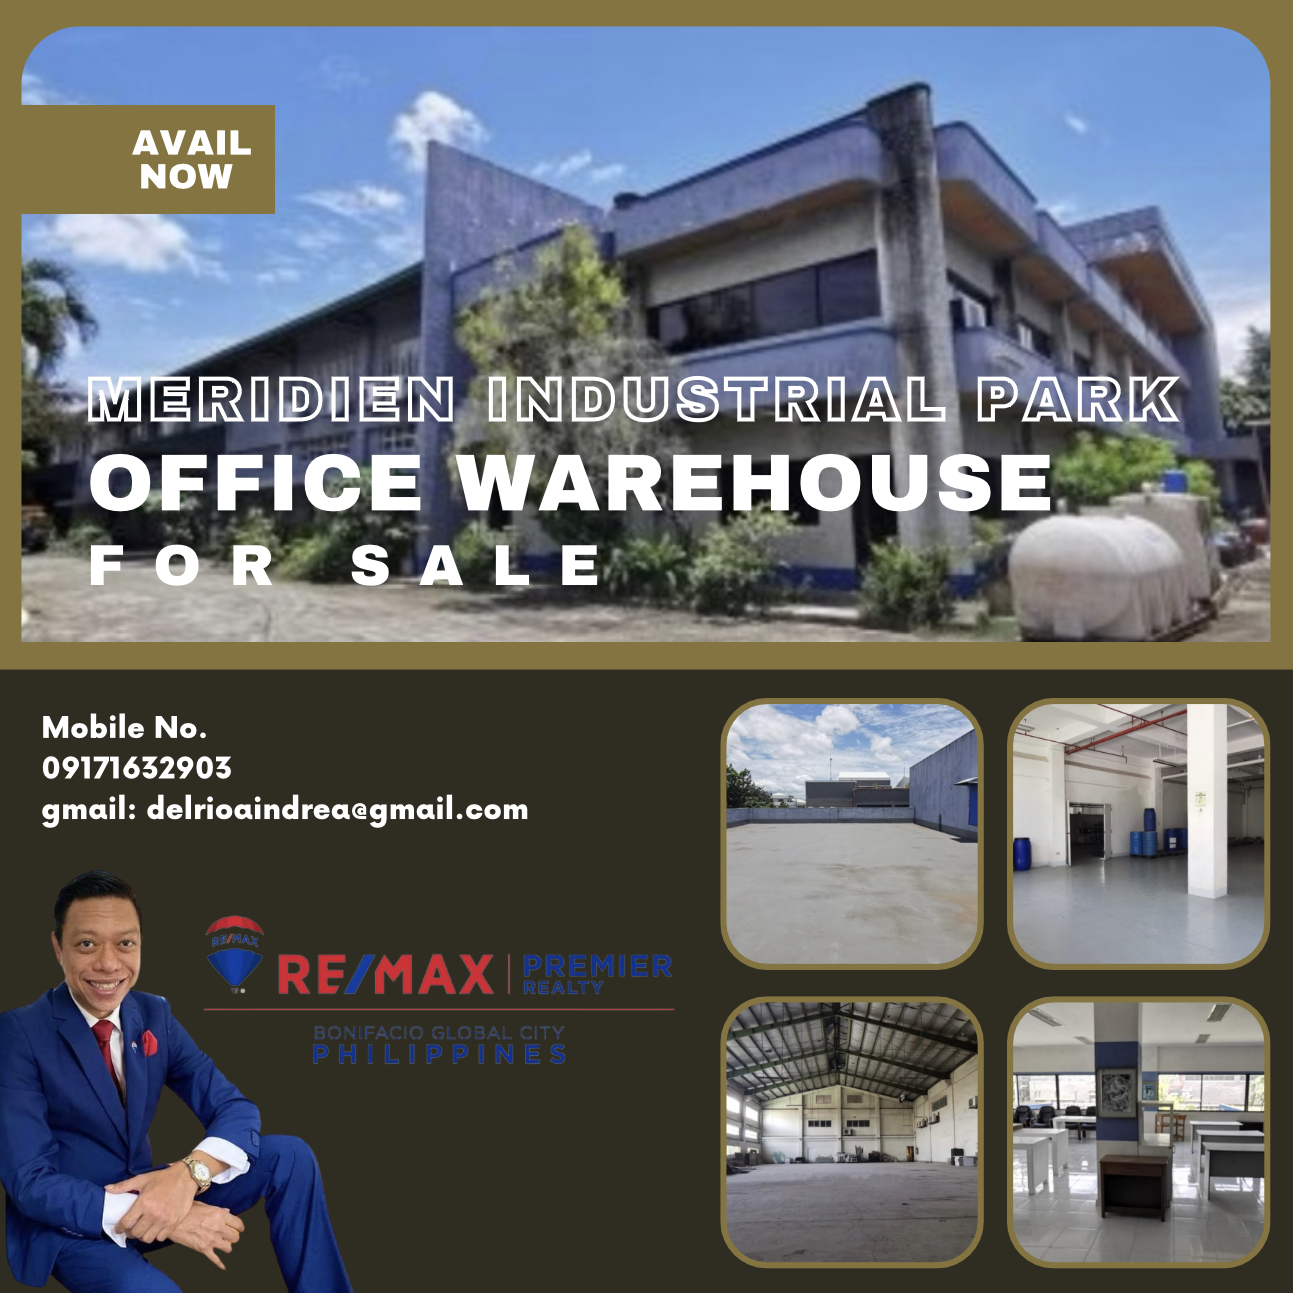 Meridien Industrial Park, Silang, Cavite – Office Warehouse for Sale‼️